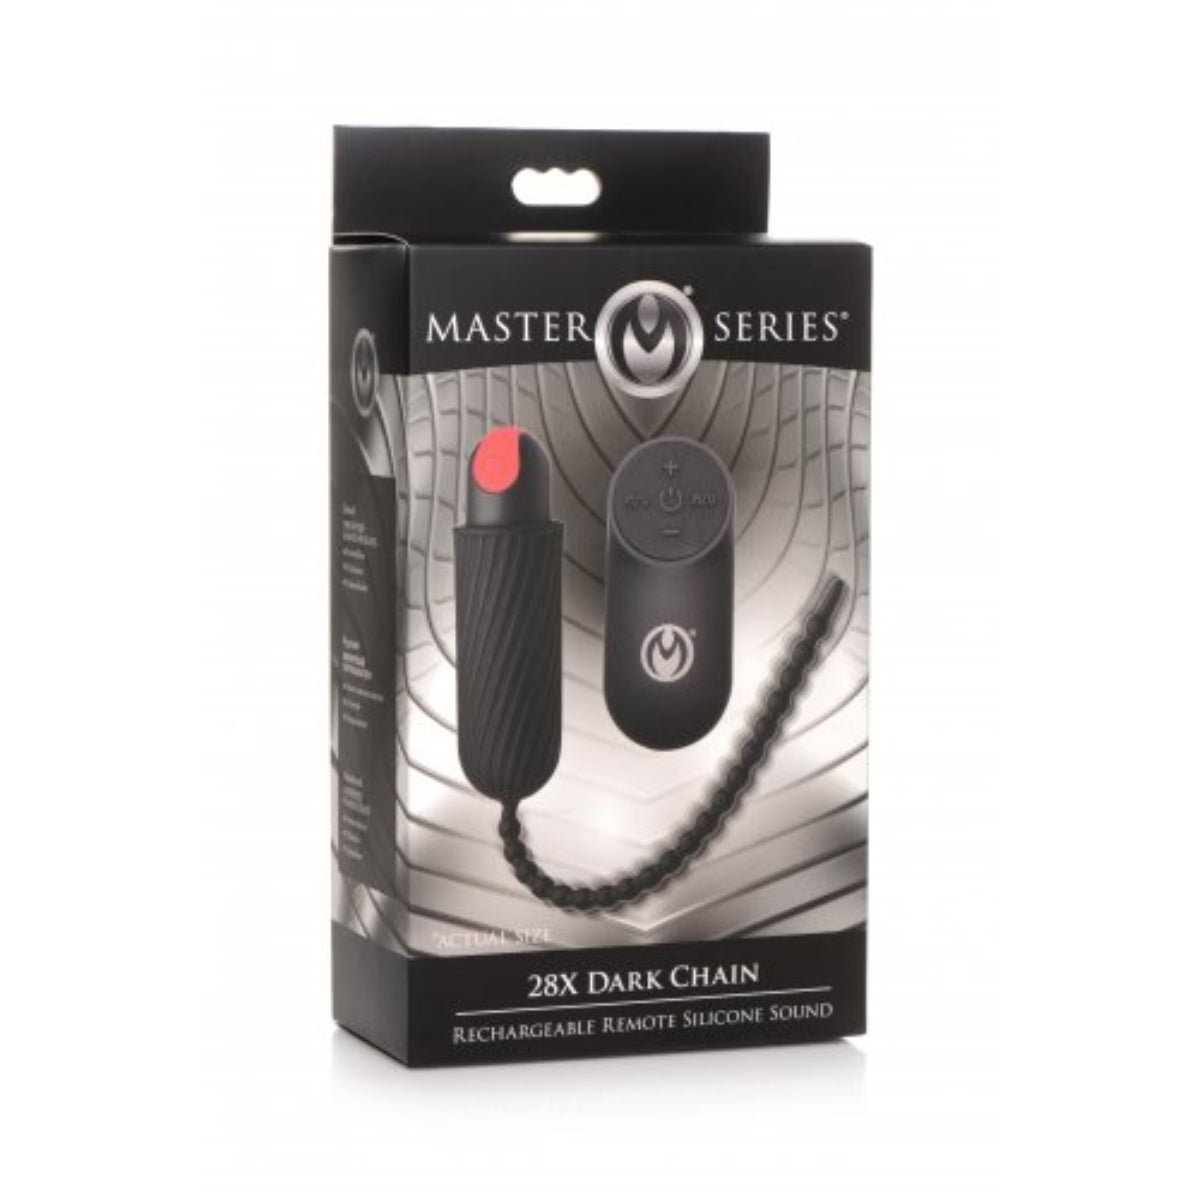 Electro Medical Master Series 7X Dark Chain Rechargeable Remote Silicone Sound   